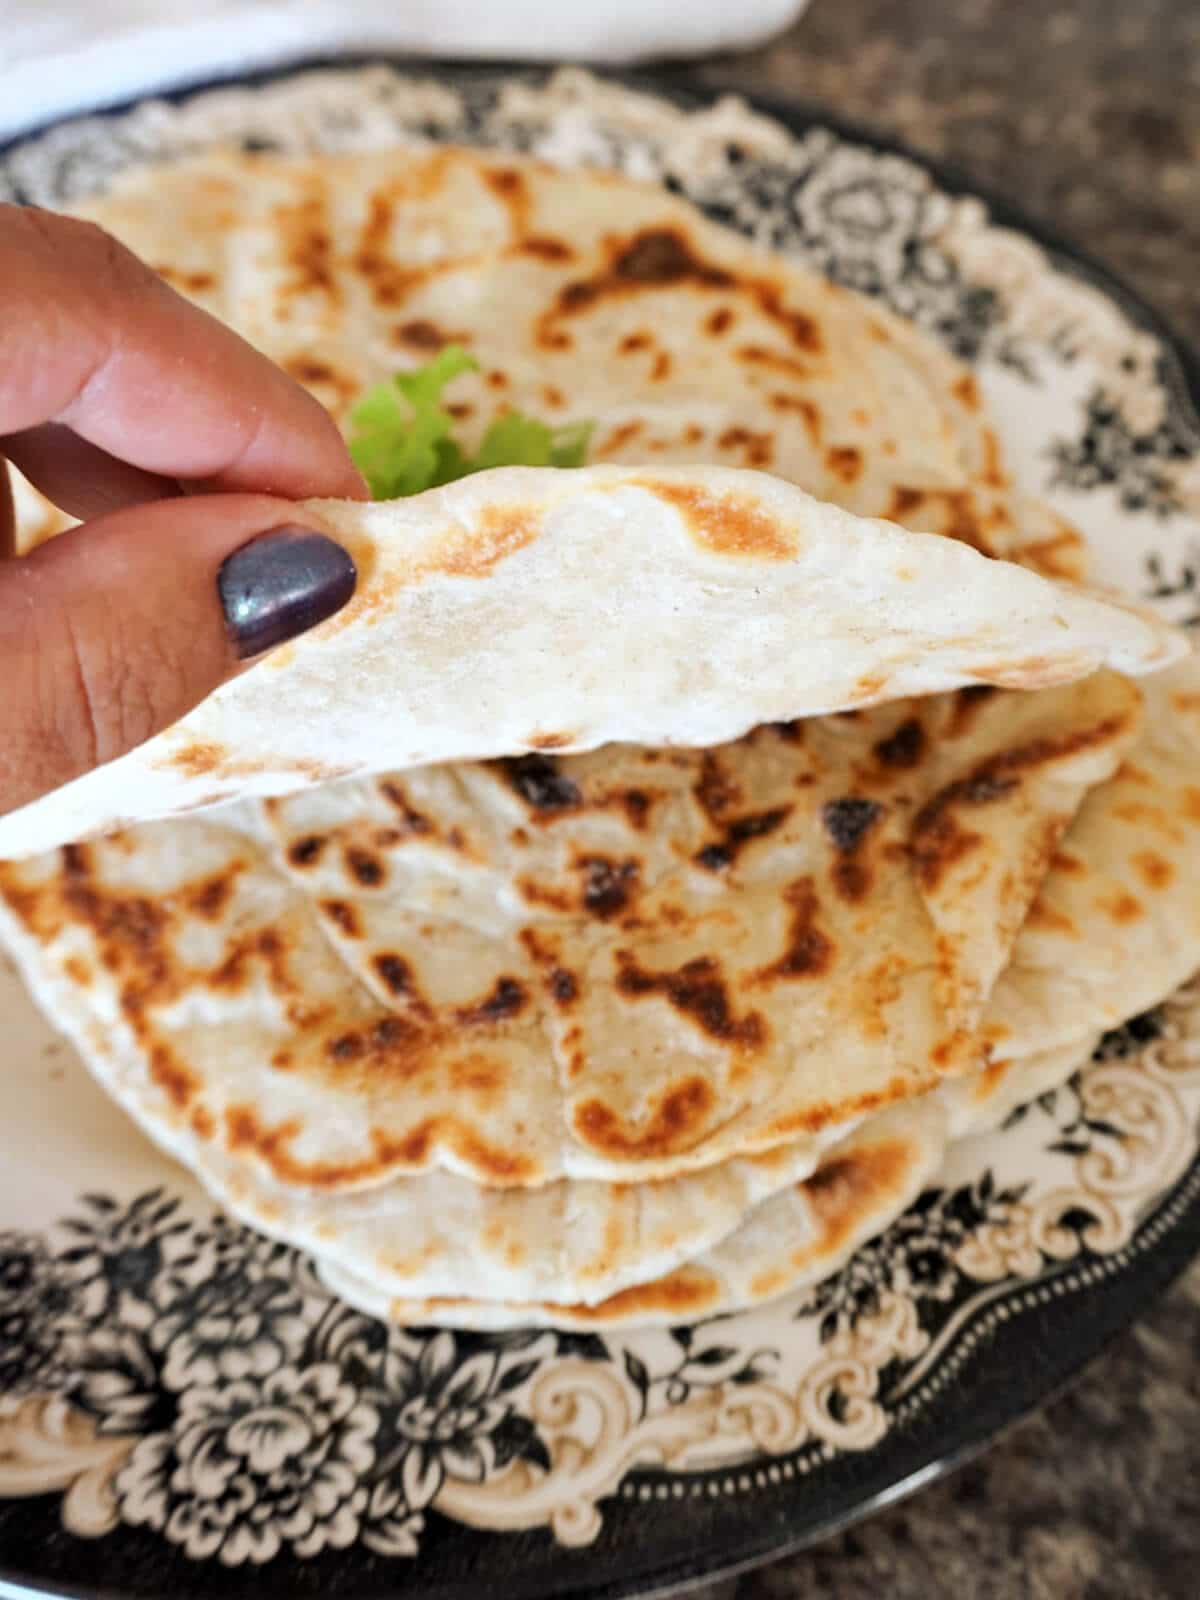 Hand-held flatbread to show how thin it is with more flat breads in the background.